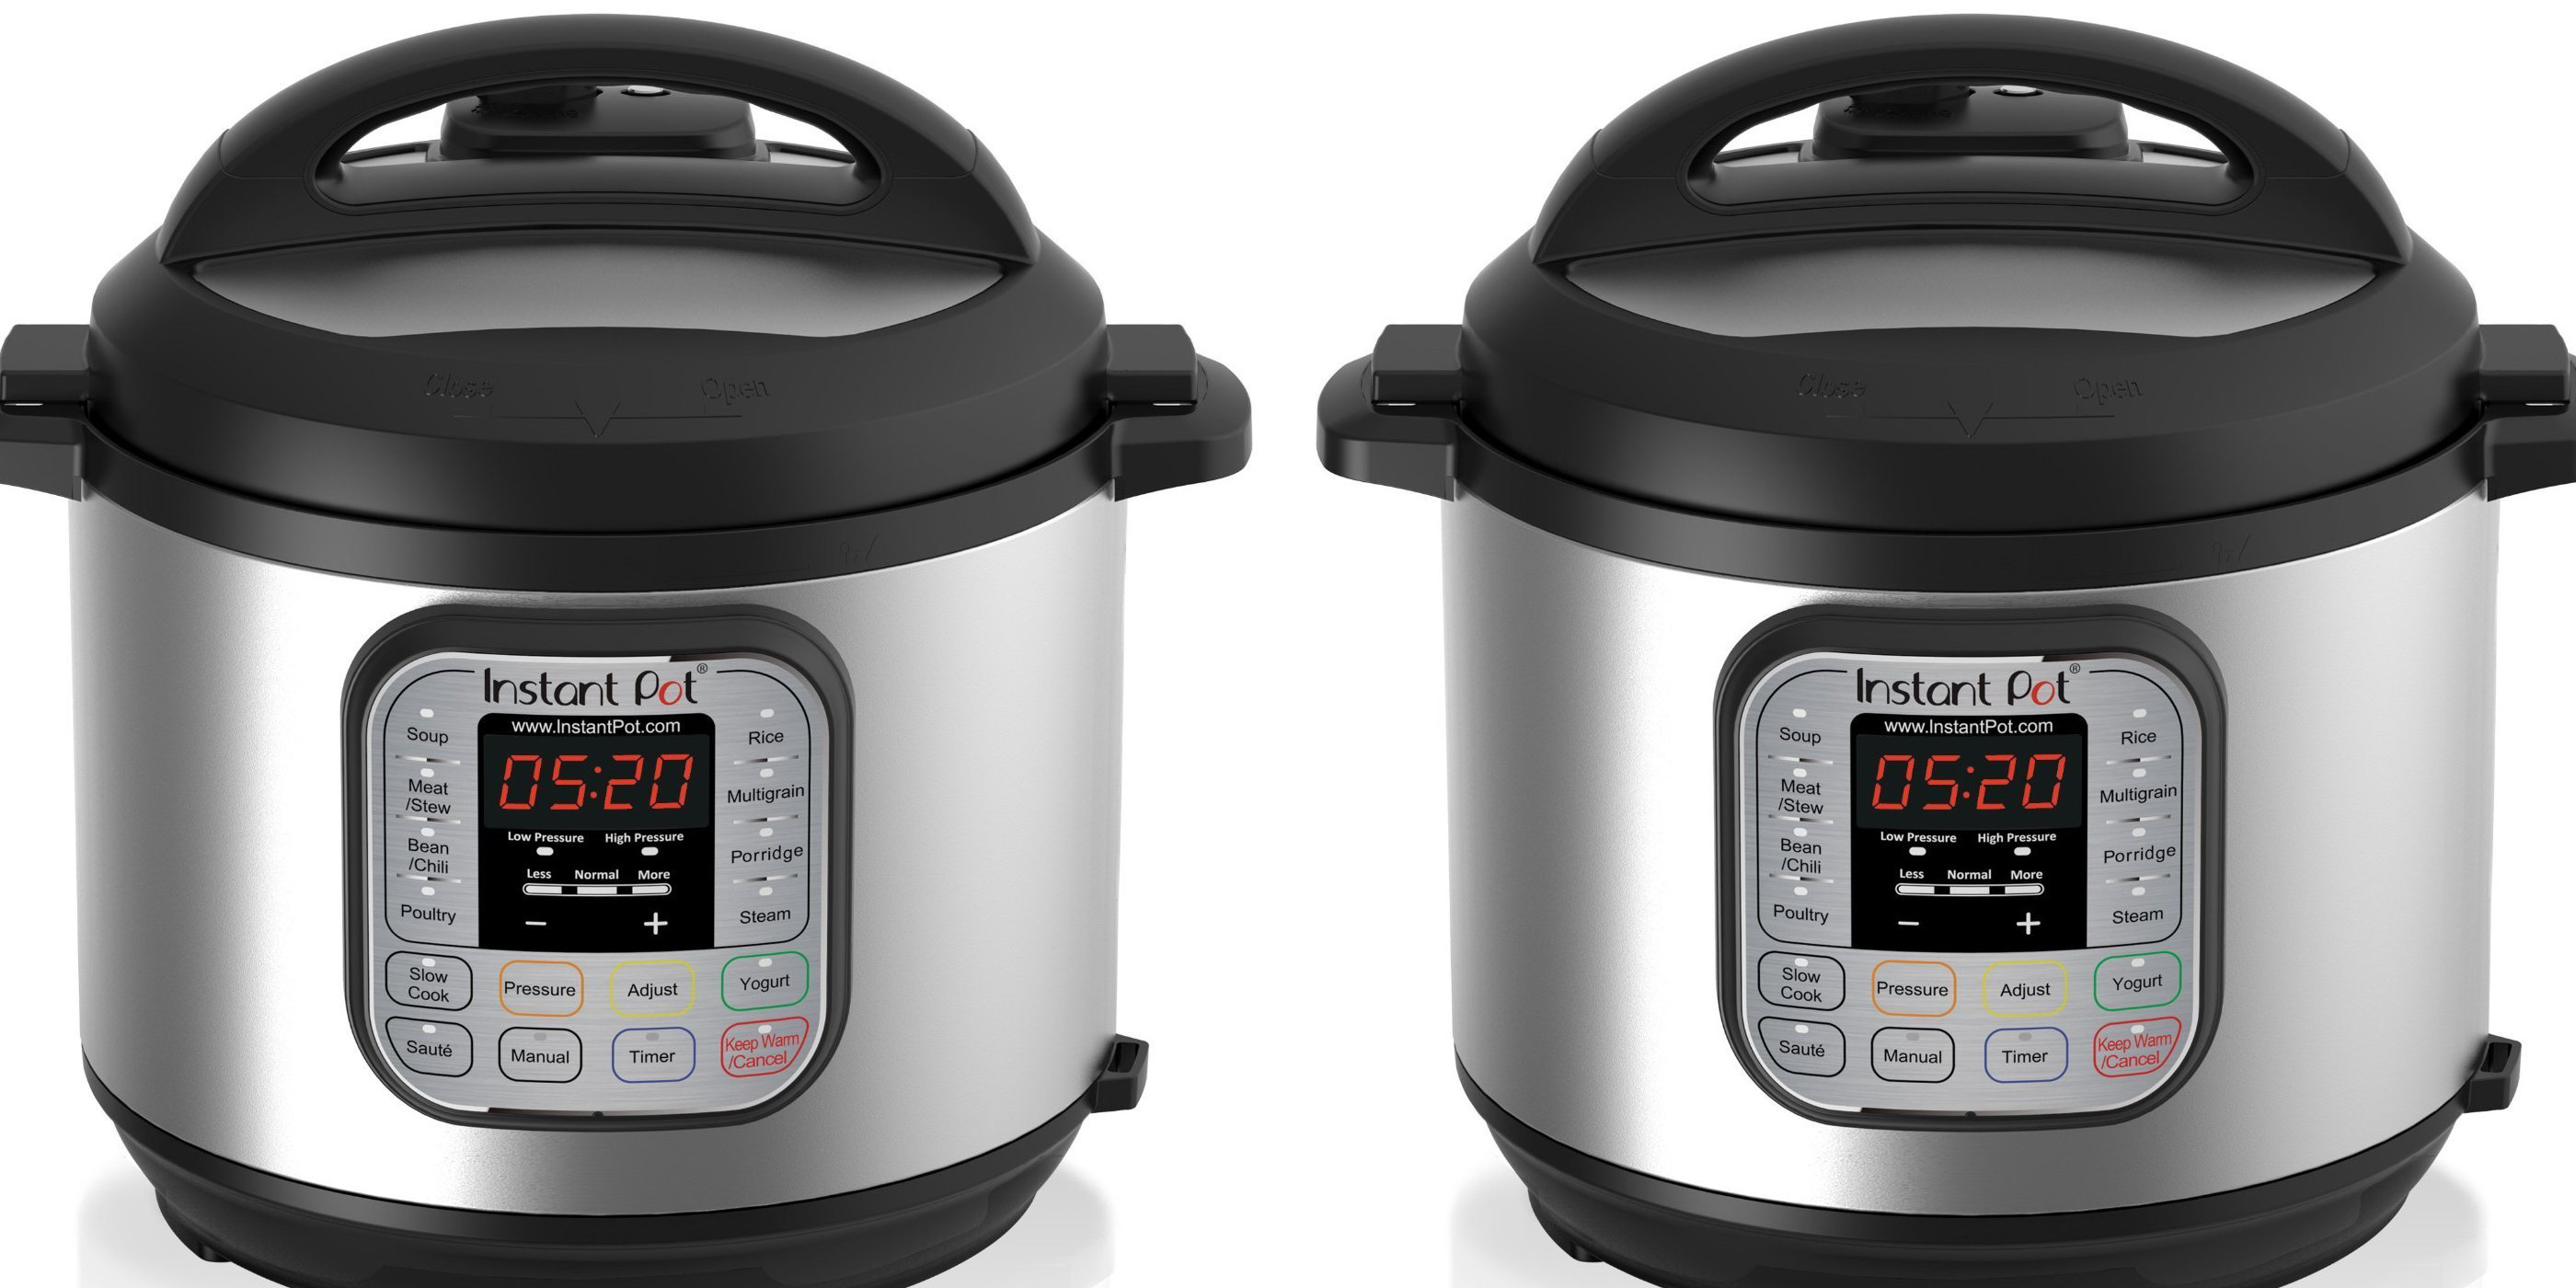 https://9to5toys.com/wp-content/uploads/sites/5/2016/11/instant-pot-ip-duo60-7-in-1-multi-functional-pressure-cooker-6qt-1000w-6.jpg